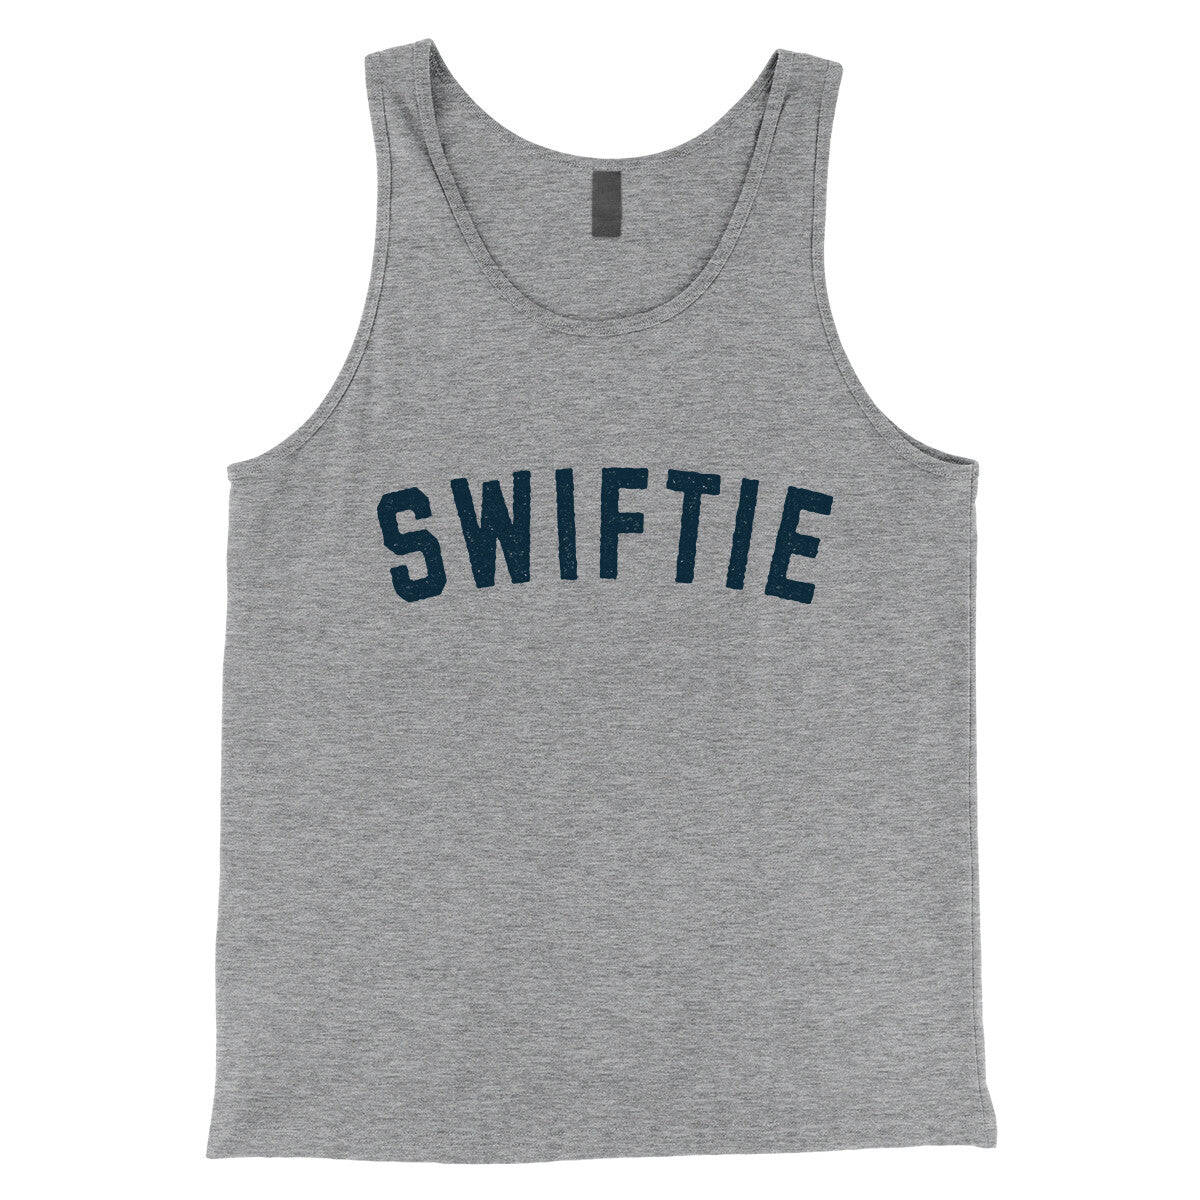 Swiftie in Athletic Heather Color